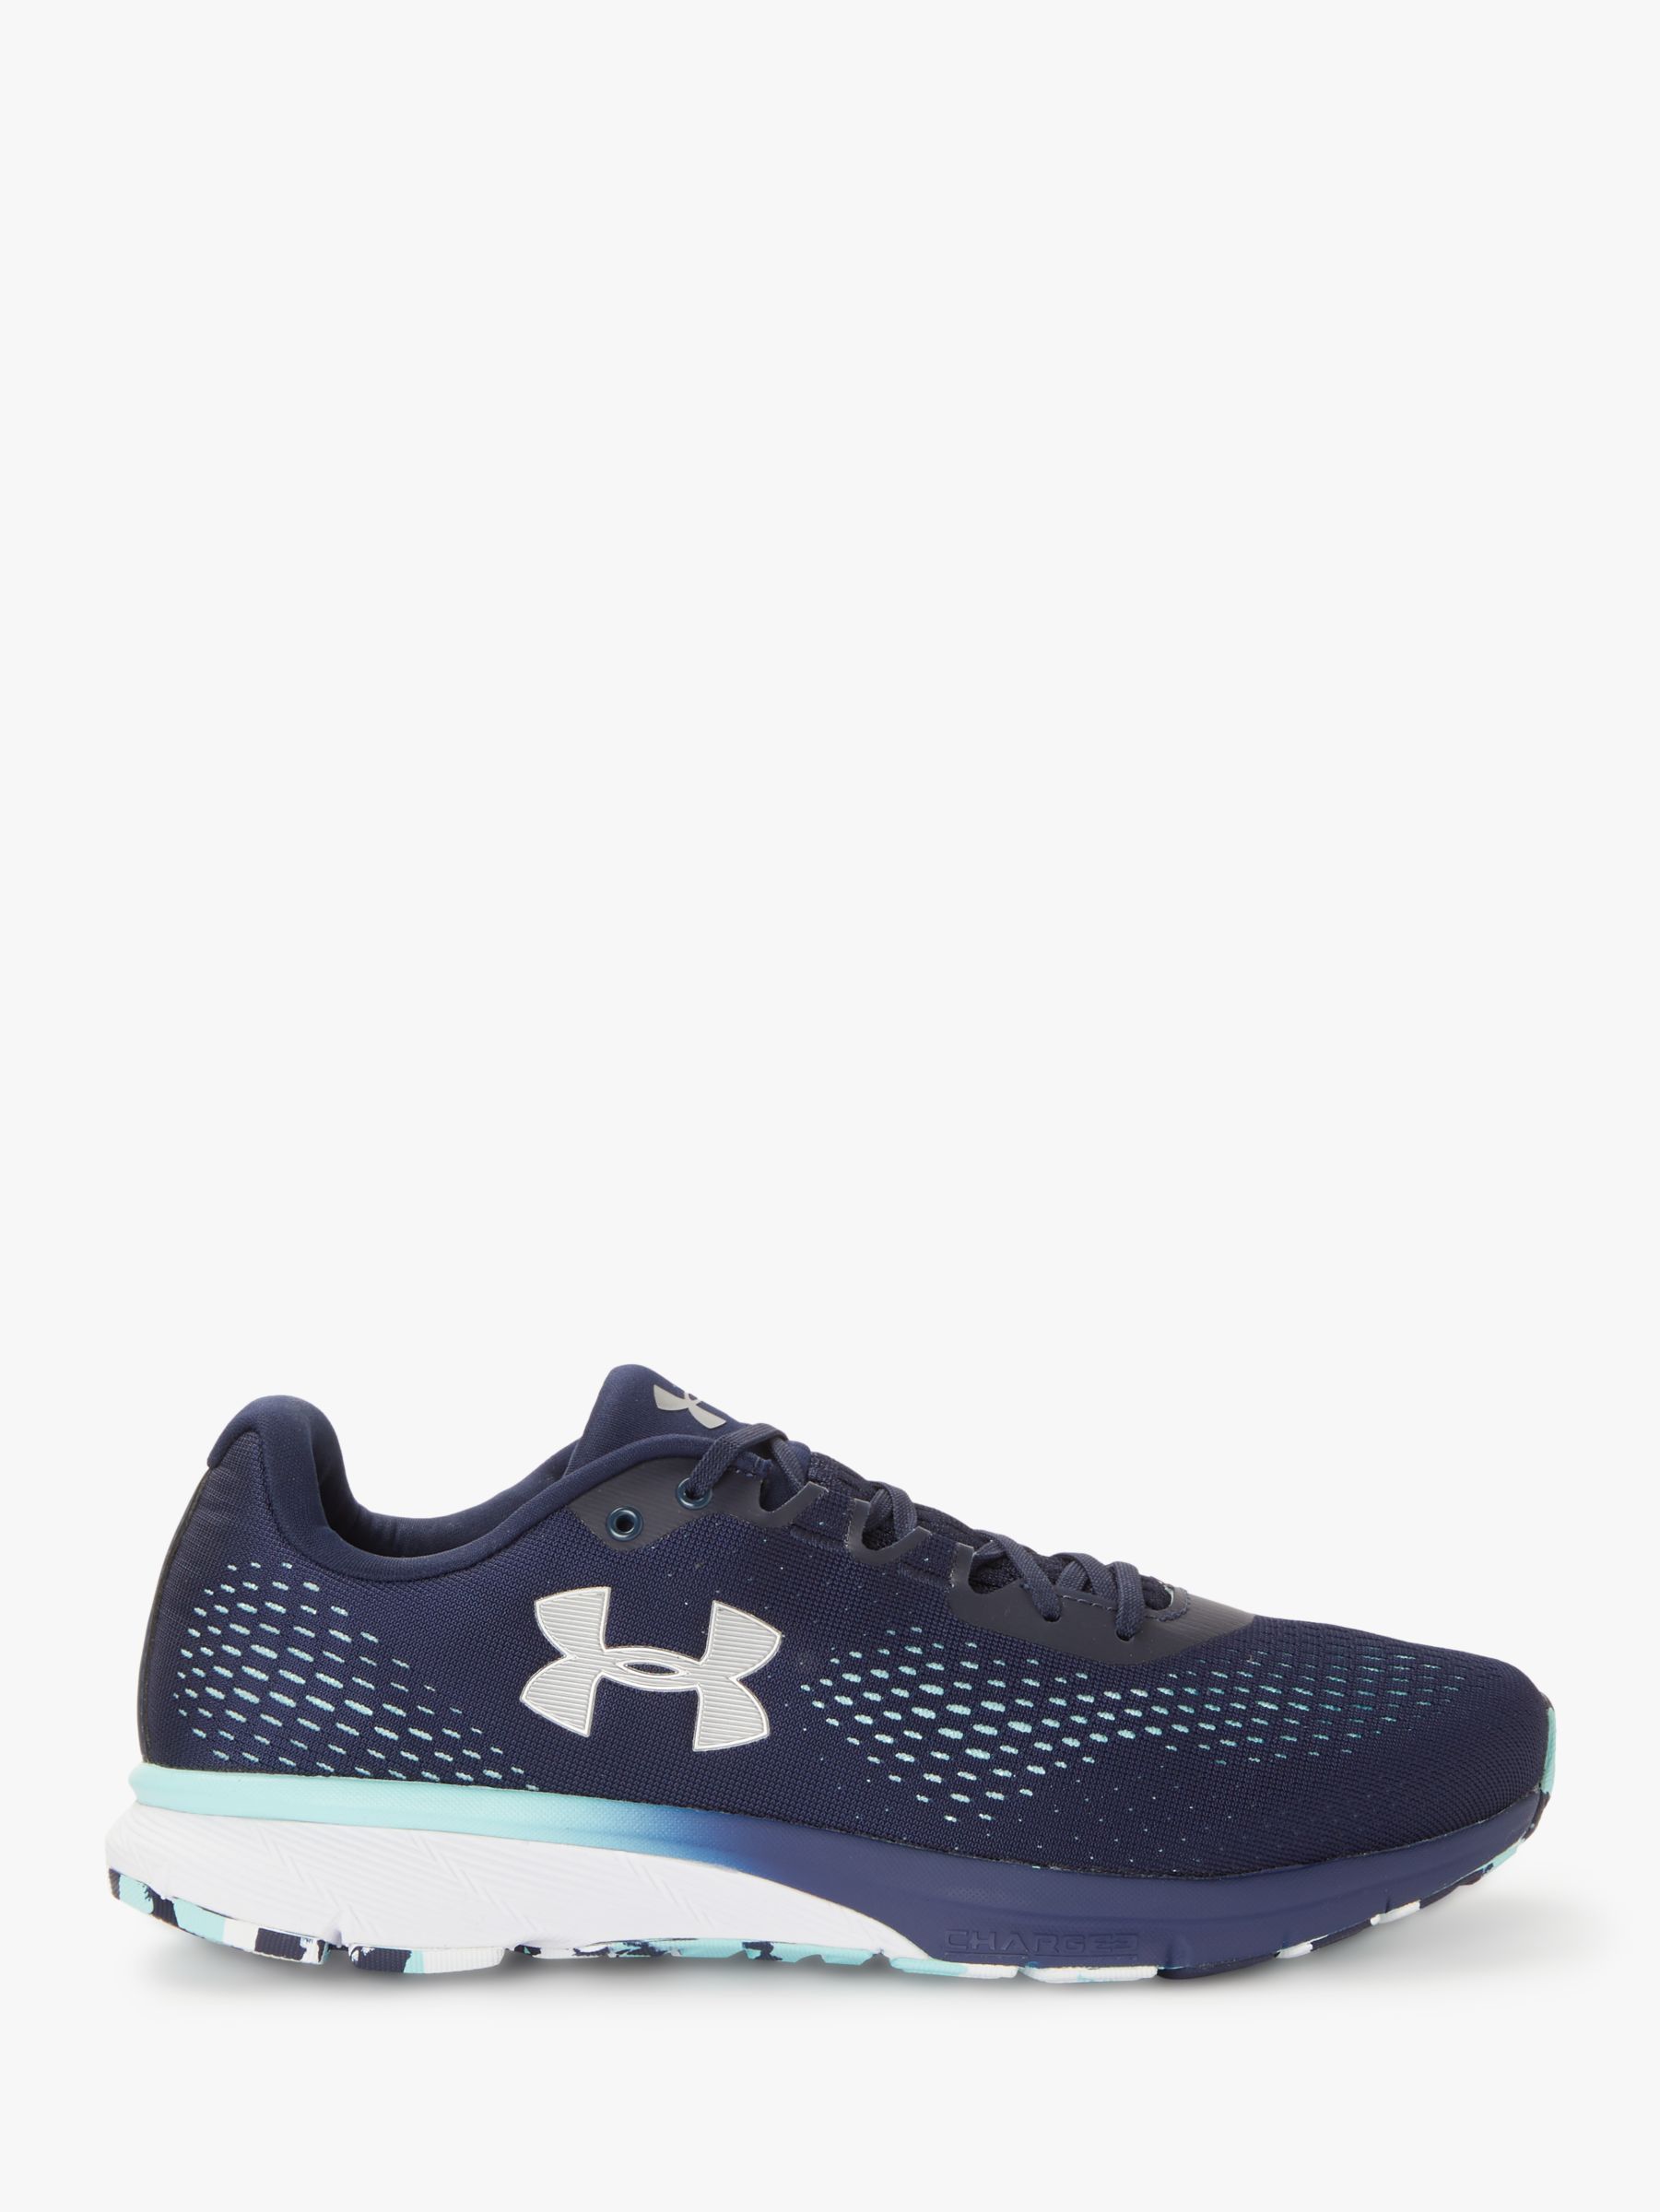 women's ua charged spark running shoes